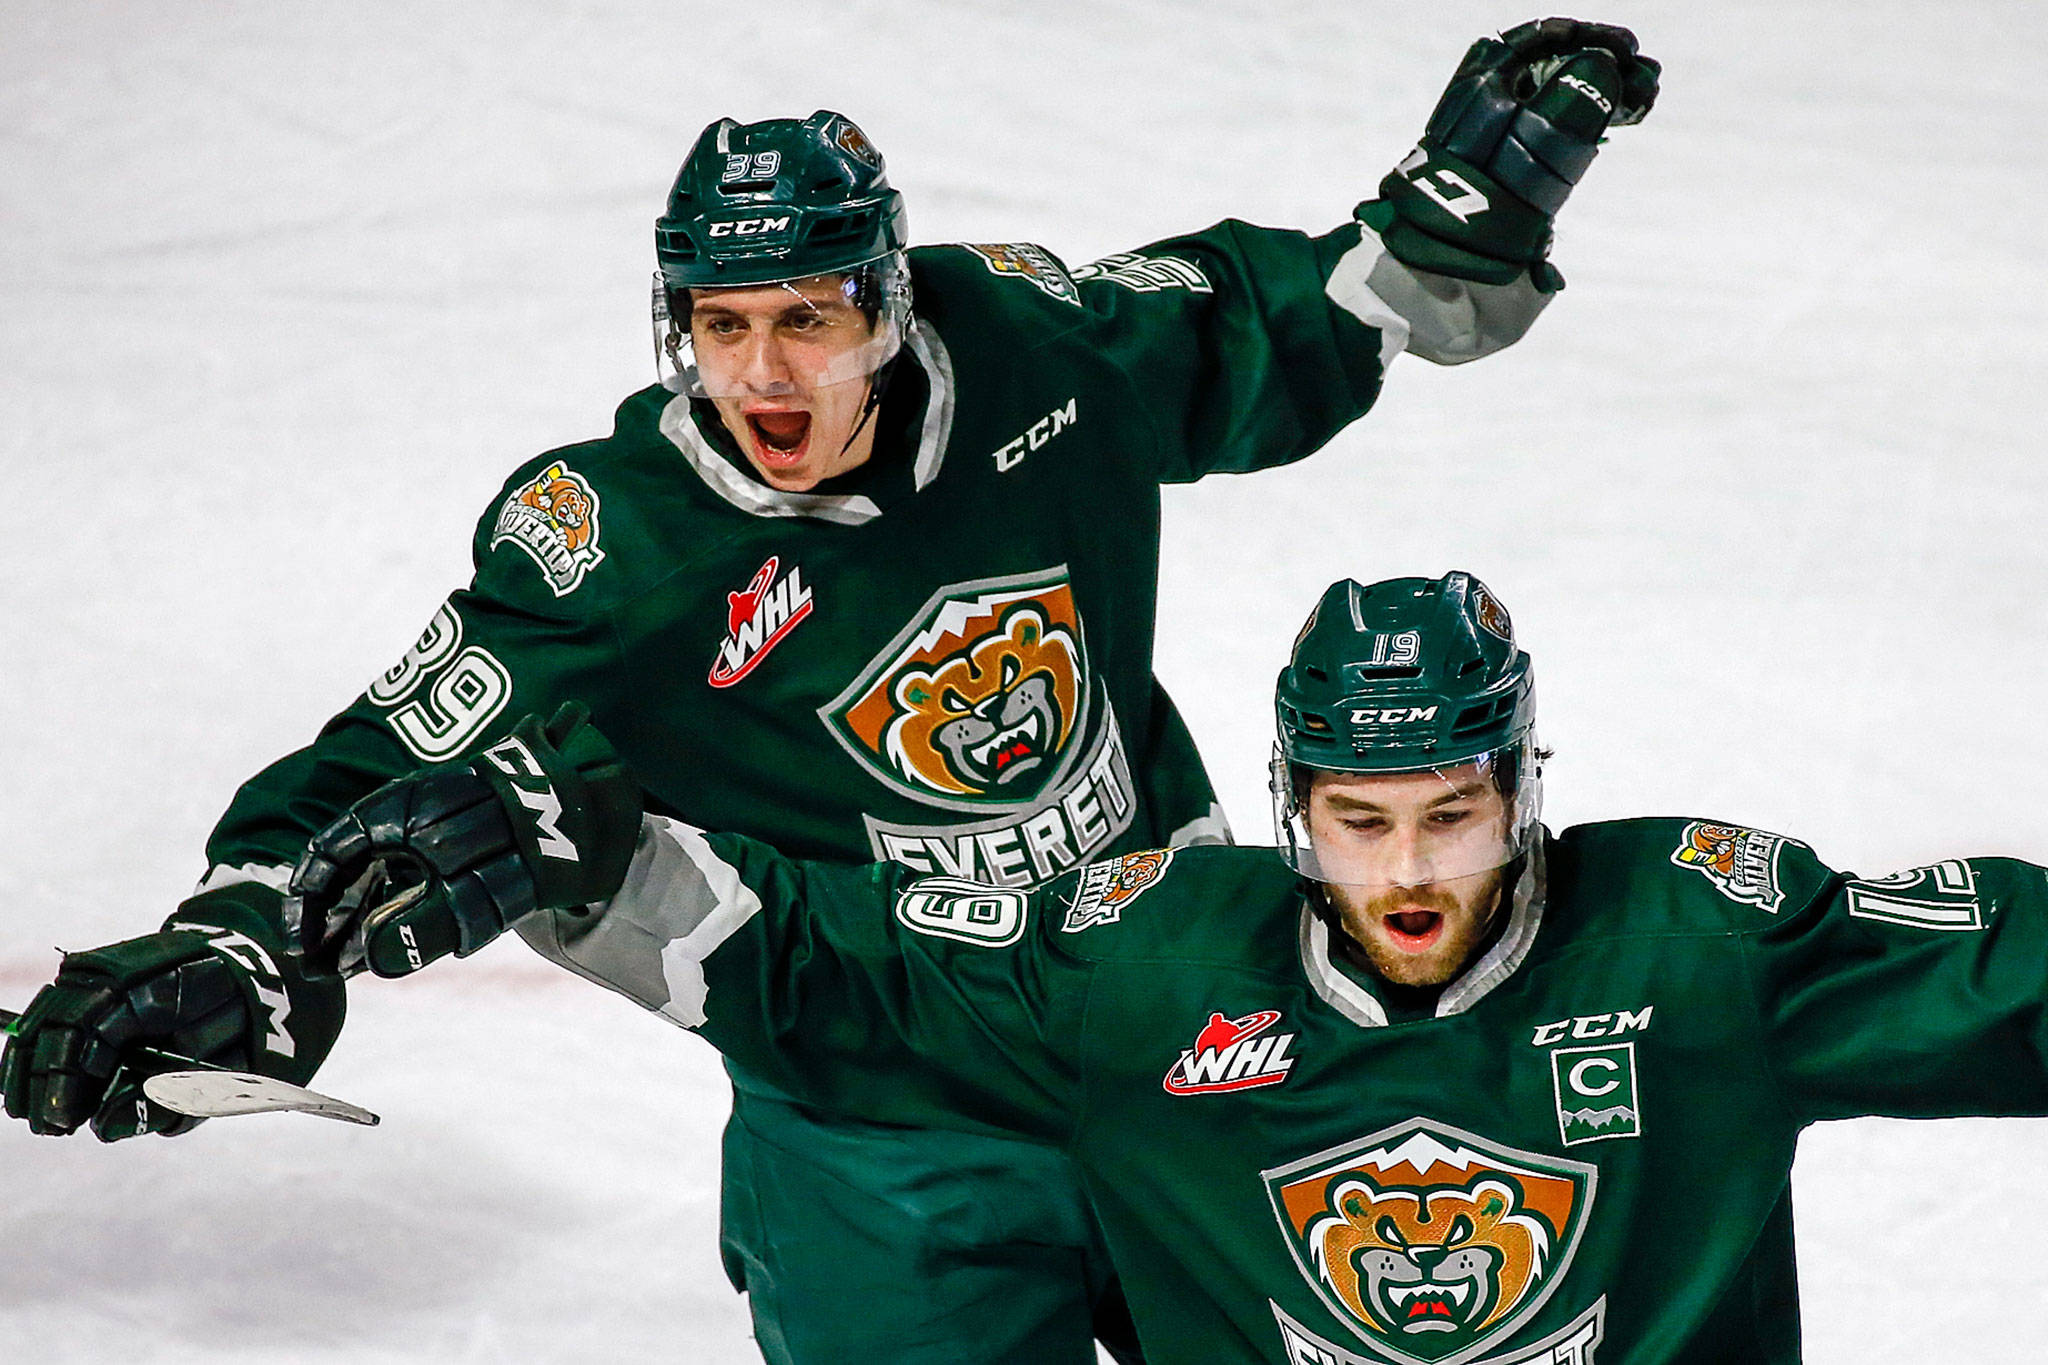 The Silvertips’ Gage Goncalves (left) and Bryce Kindopp celebrate a goal during a game against the Thunderbirds on March 8, 2020, at ShoWare Center in Kent. (Kevin Clark / The Herald)